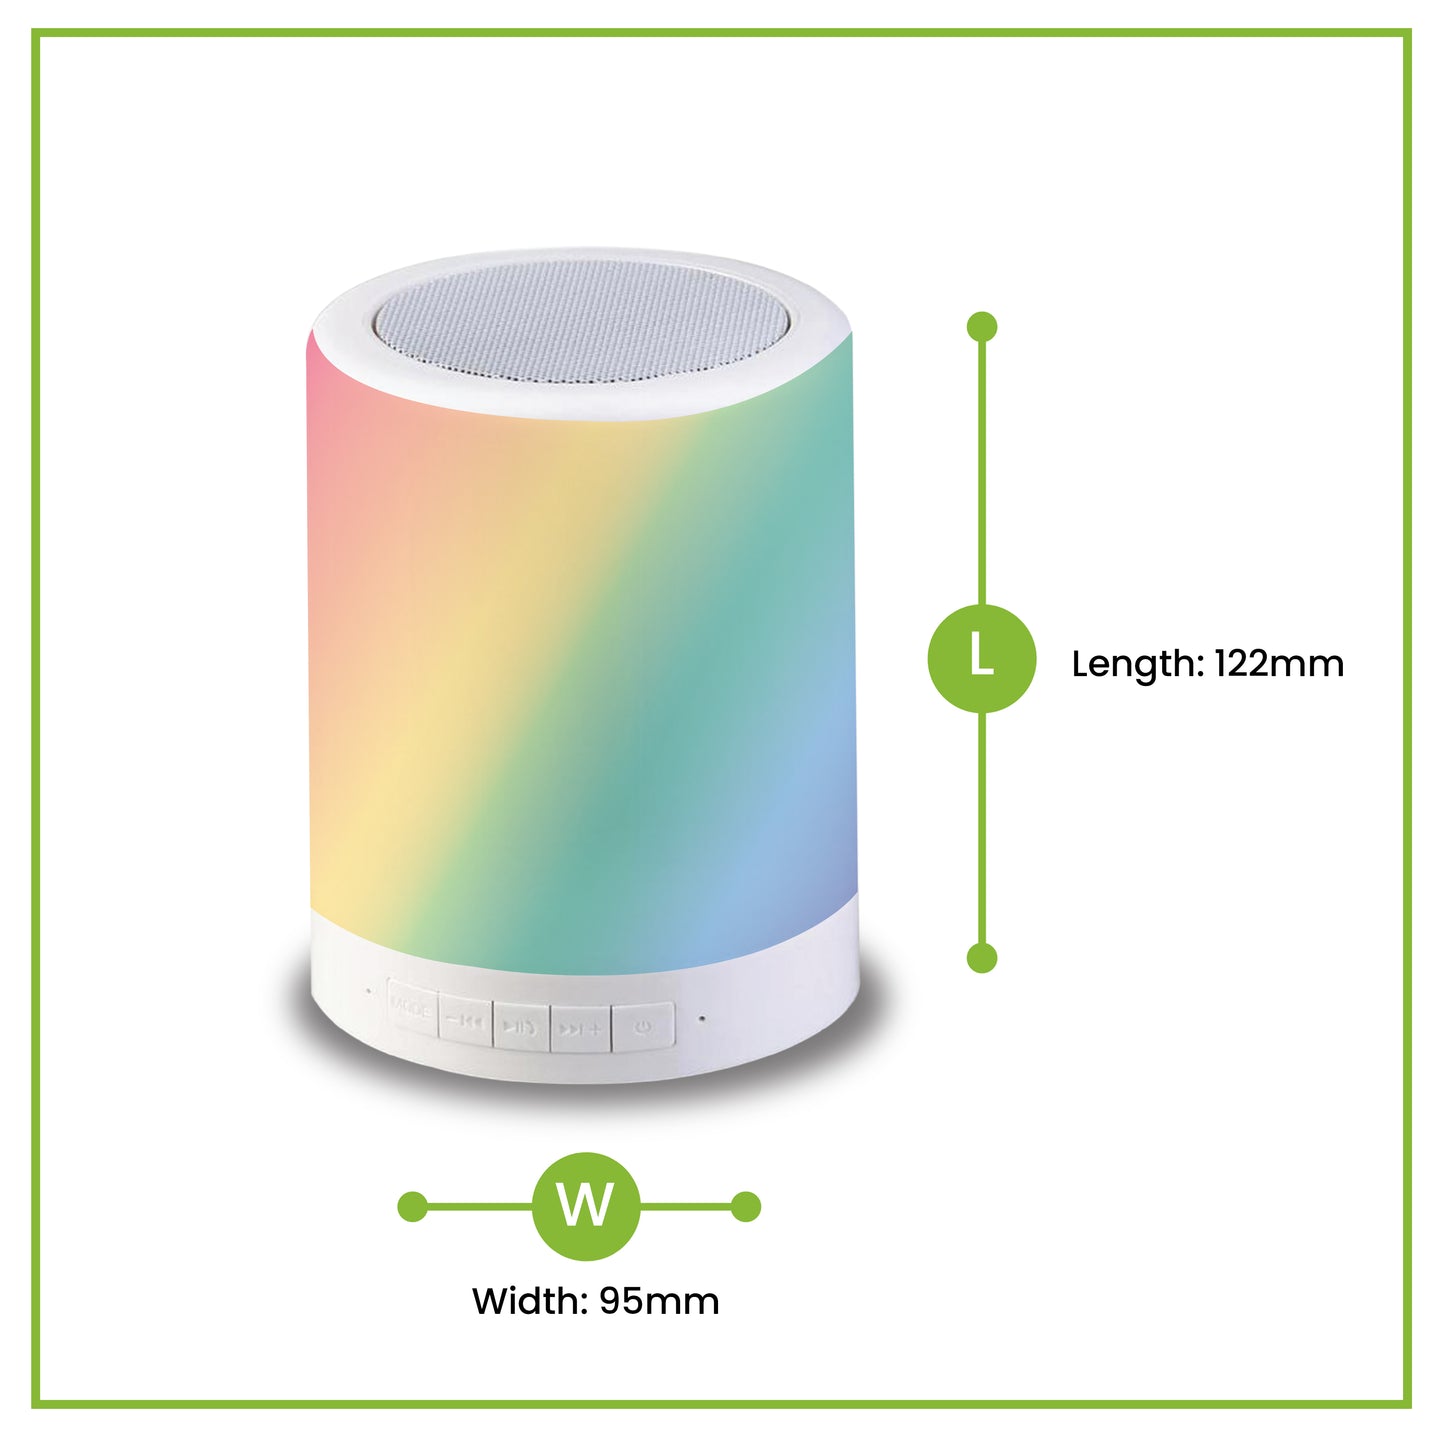 Nxled Smart Music Touch Lamp Bluetooth Speaker - White (ANX-MTL3)